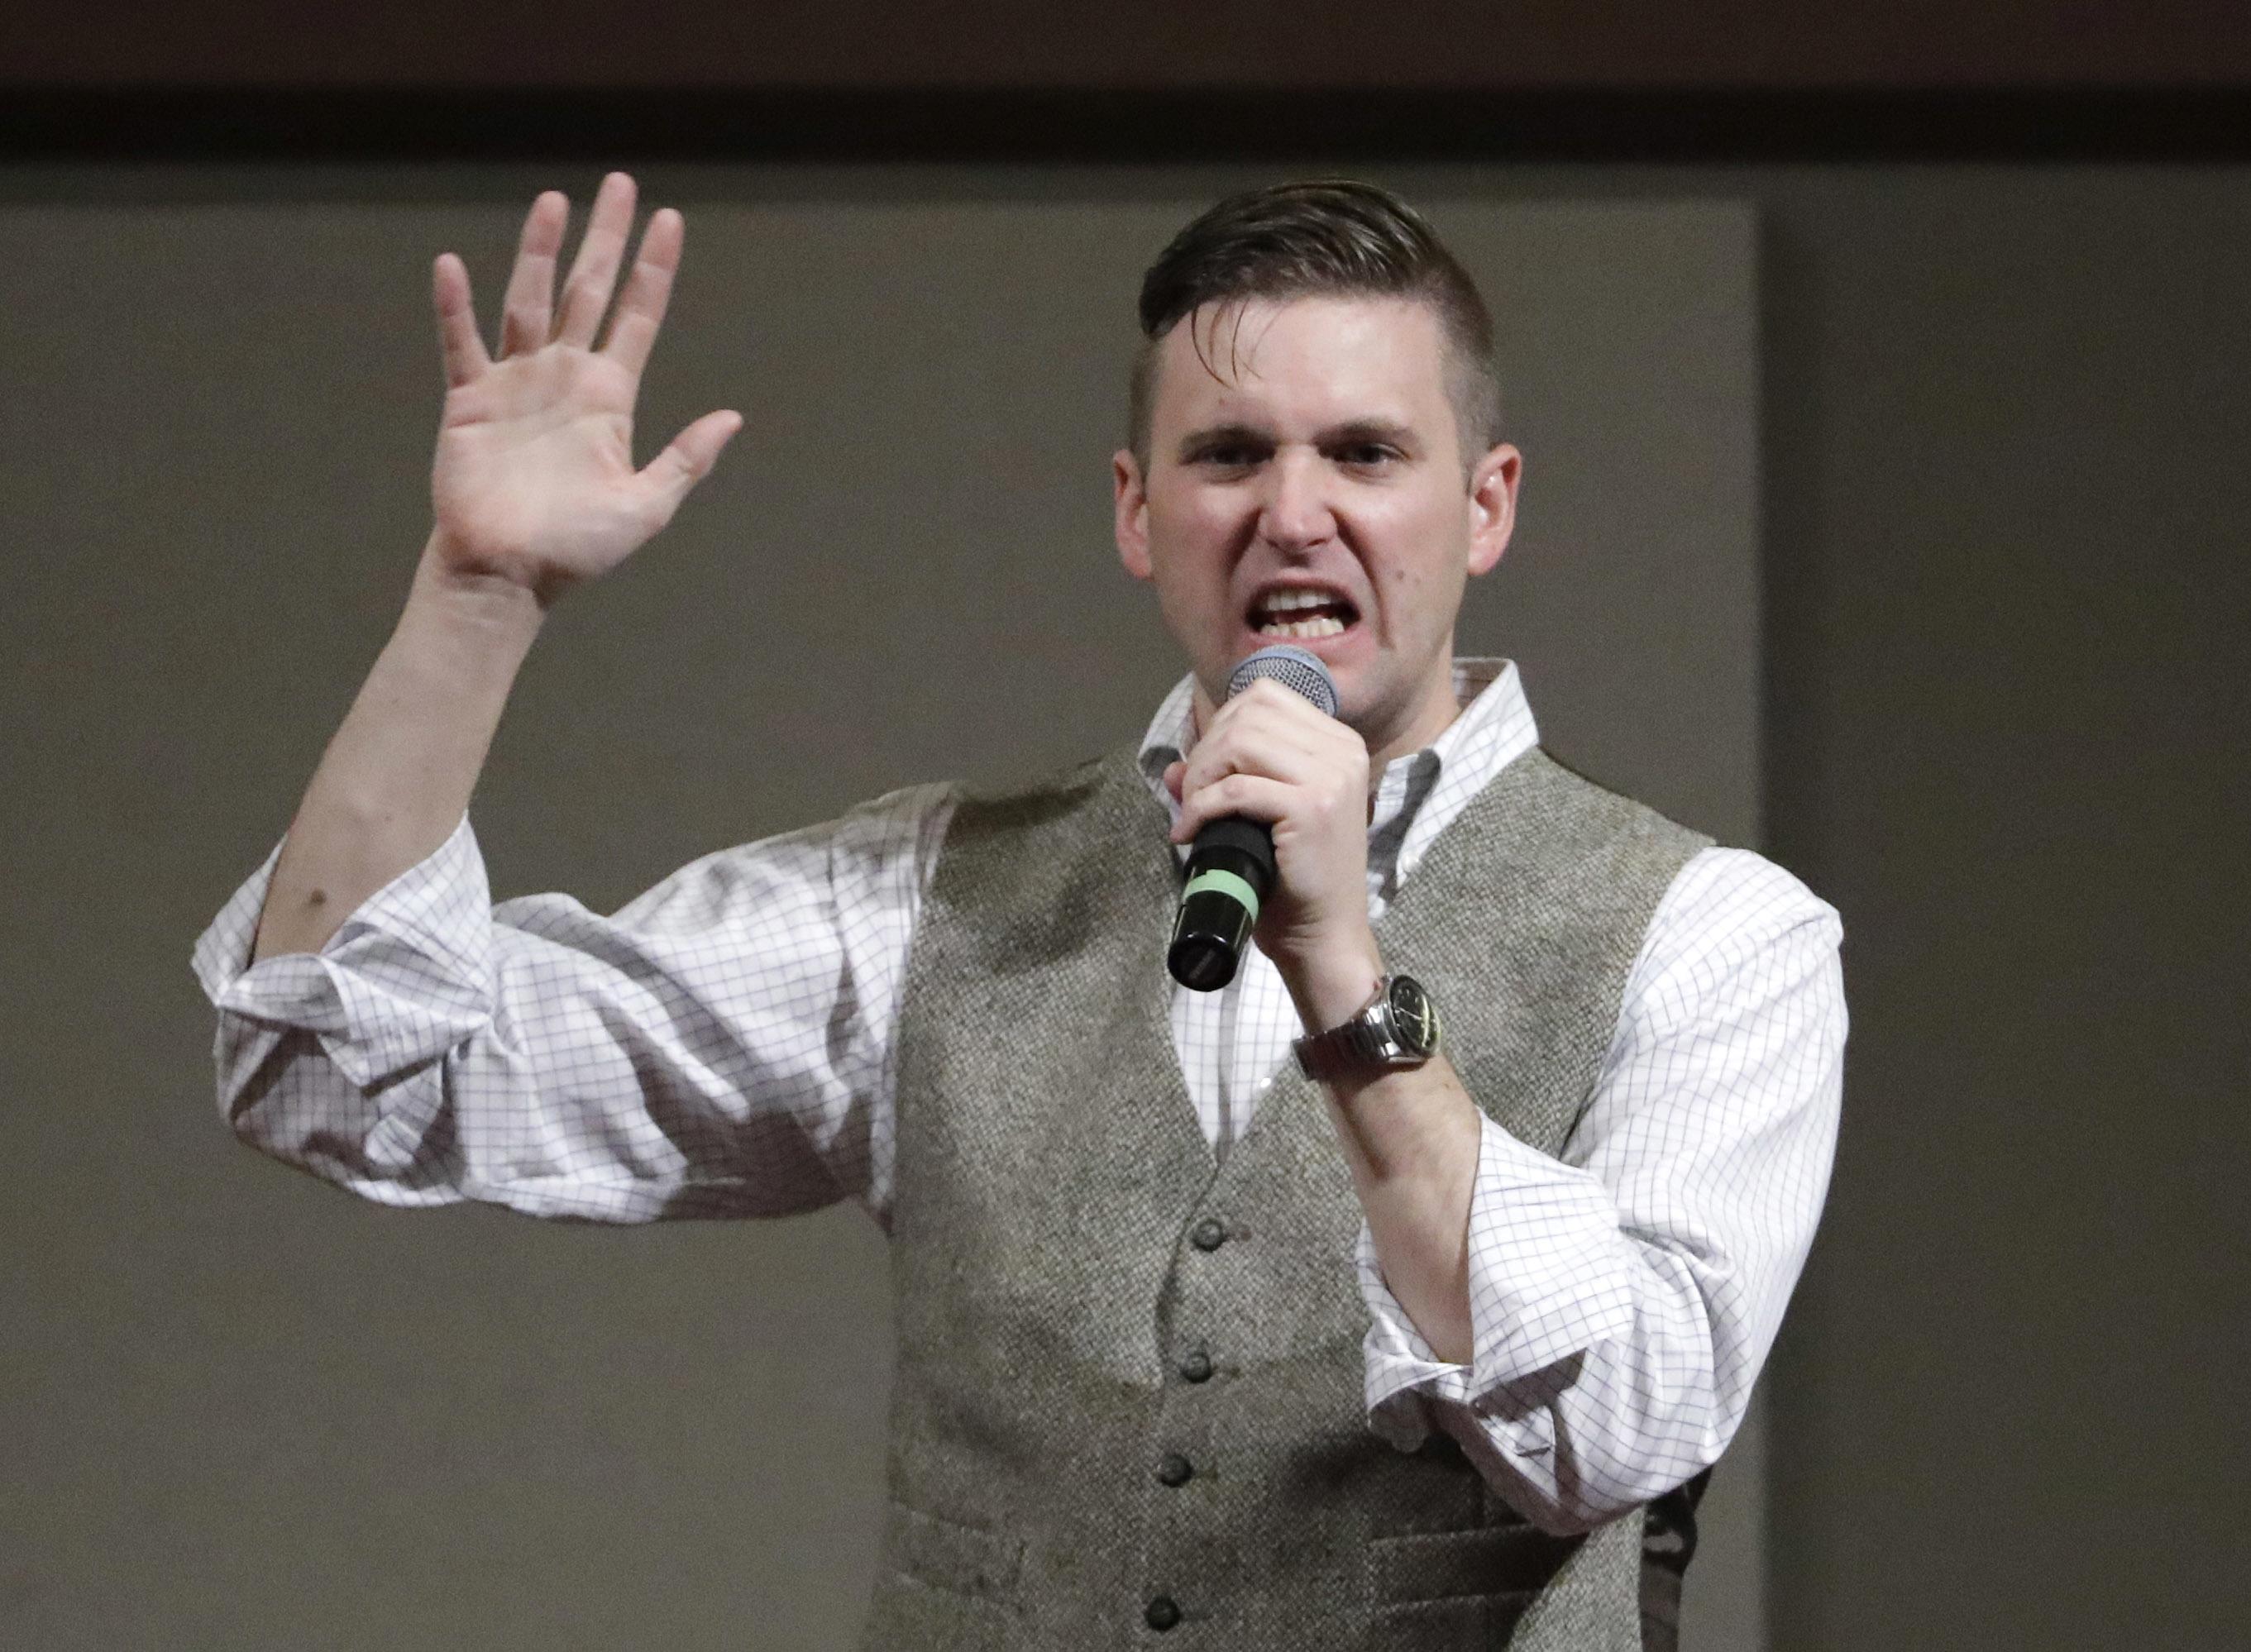 MSU denies request for space made by White Nationalist National Policy Institute